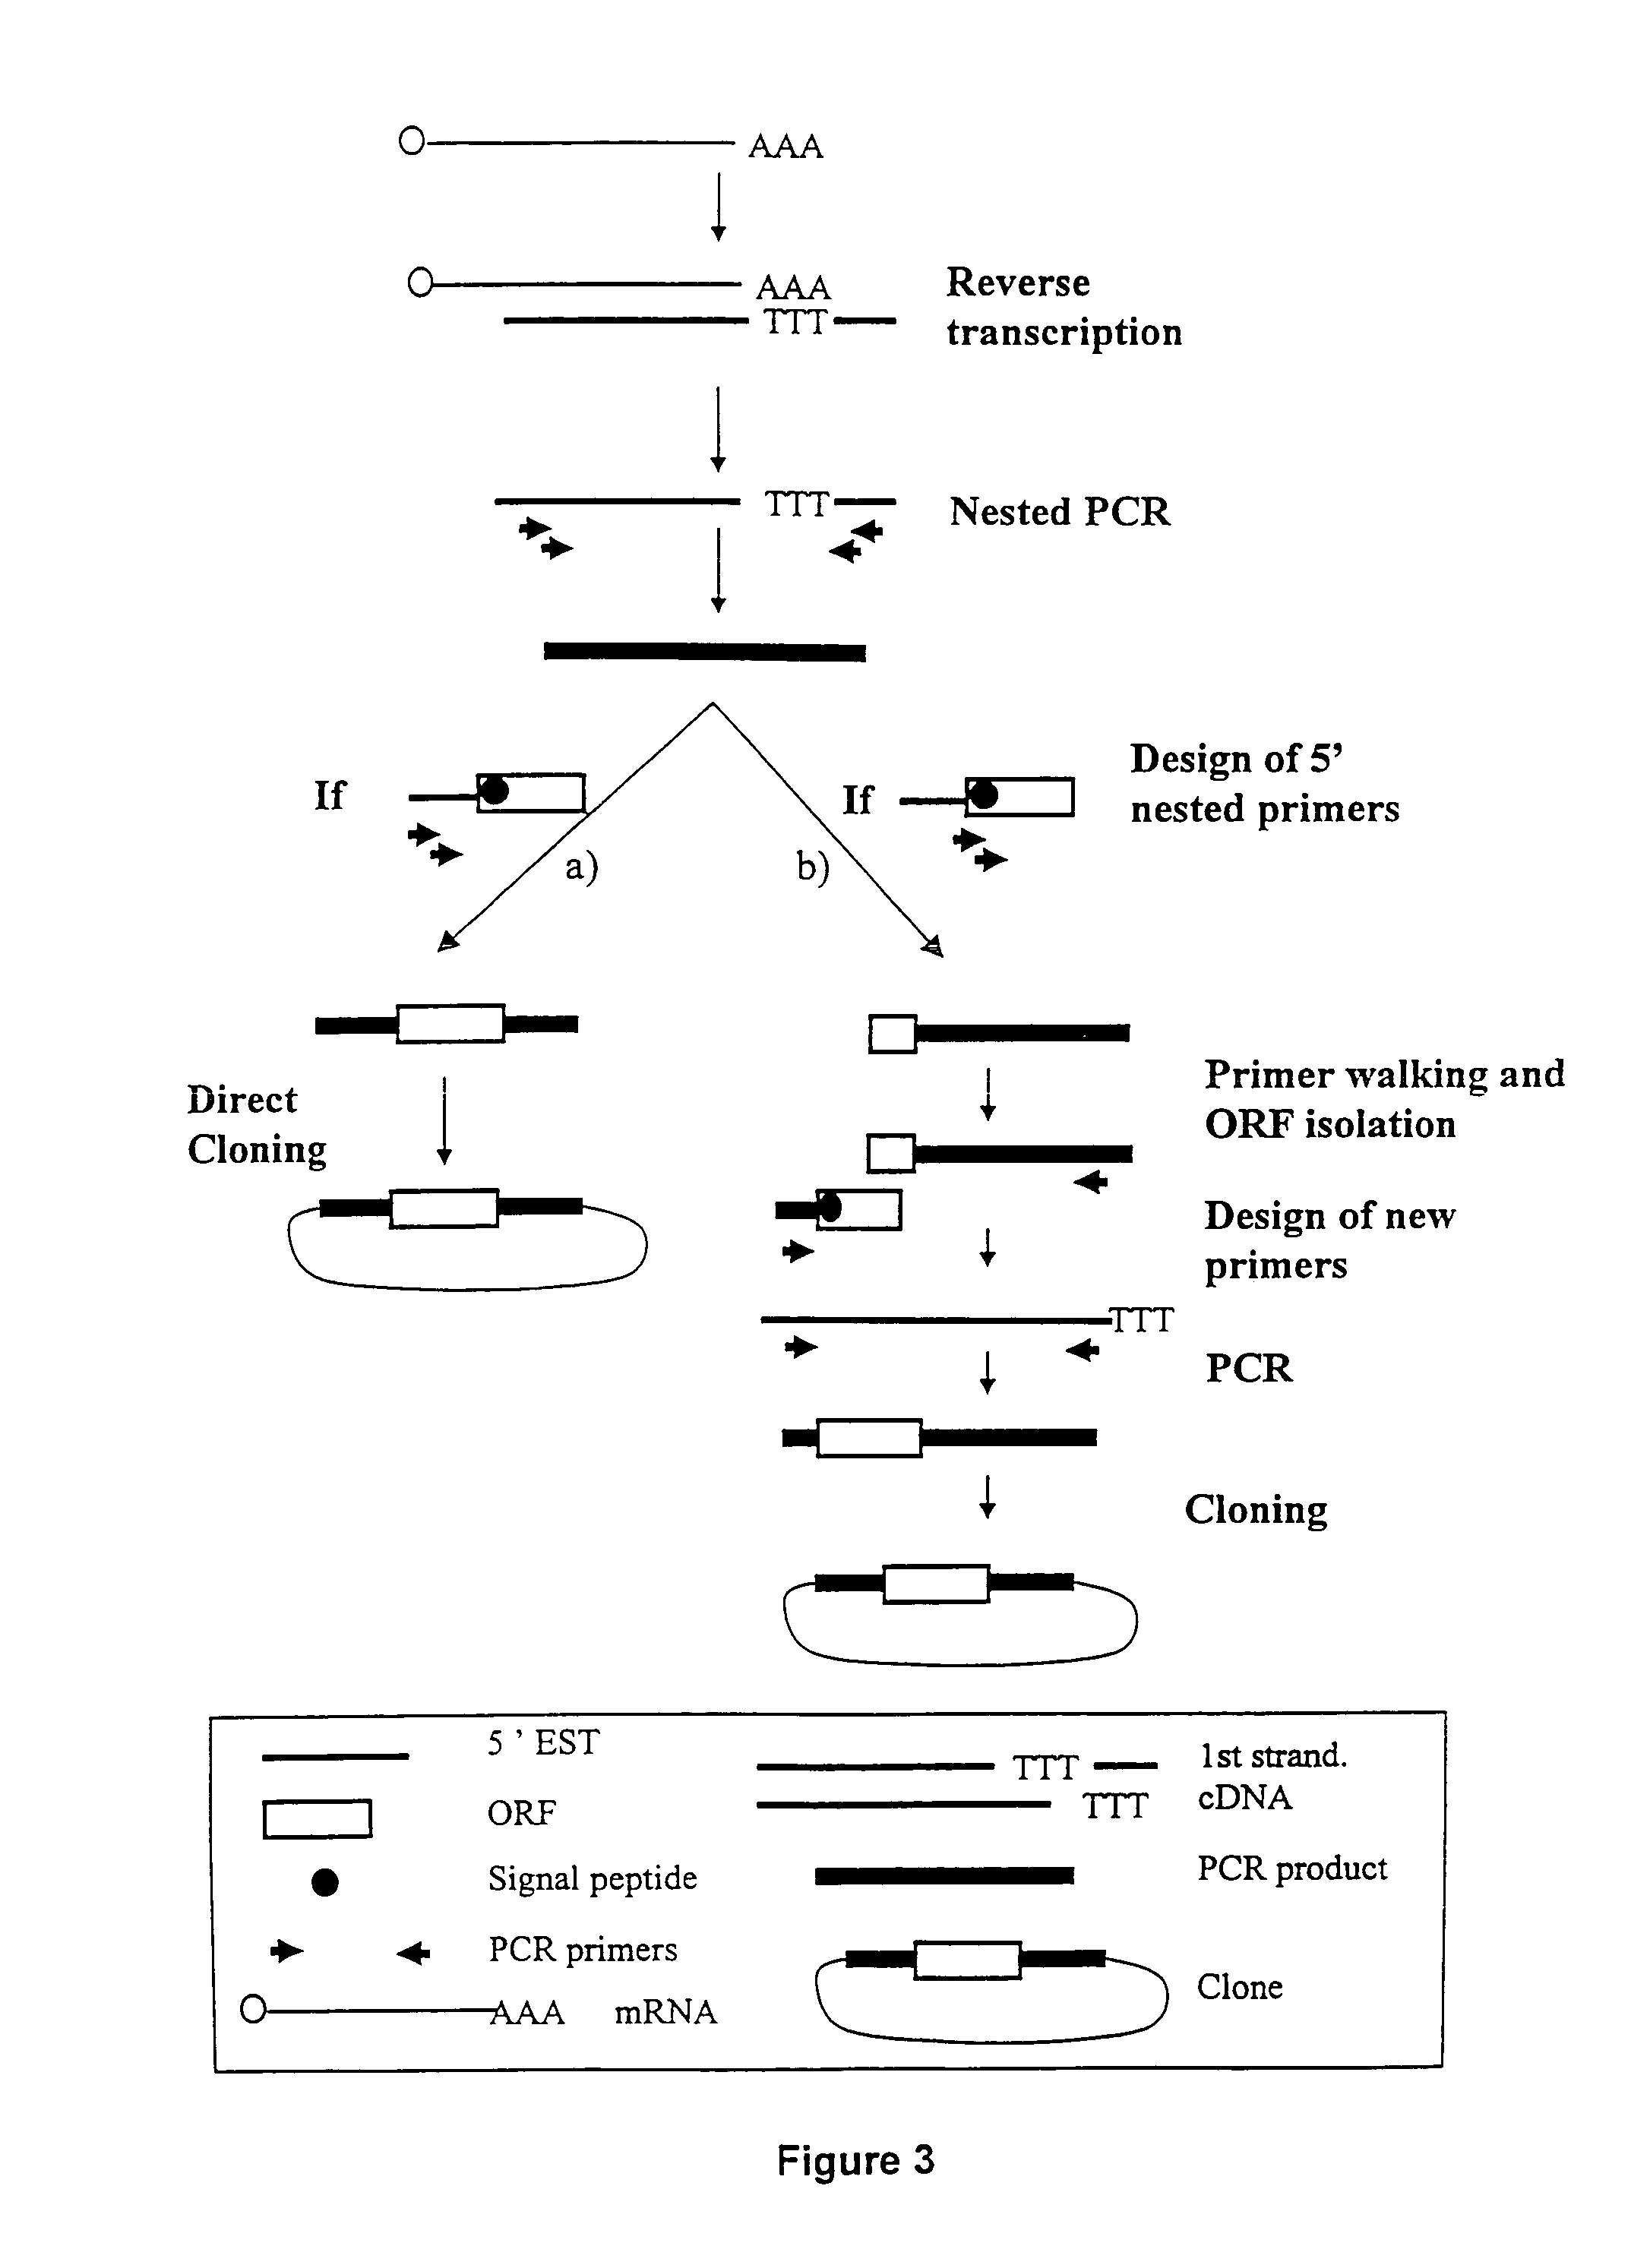 ESTs and encoded human proteins